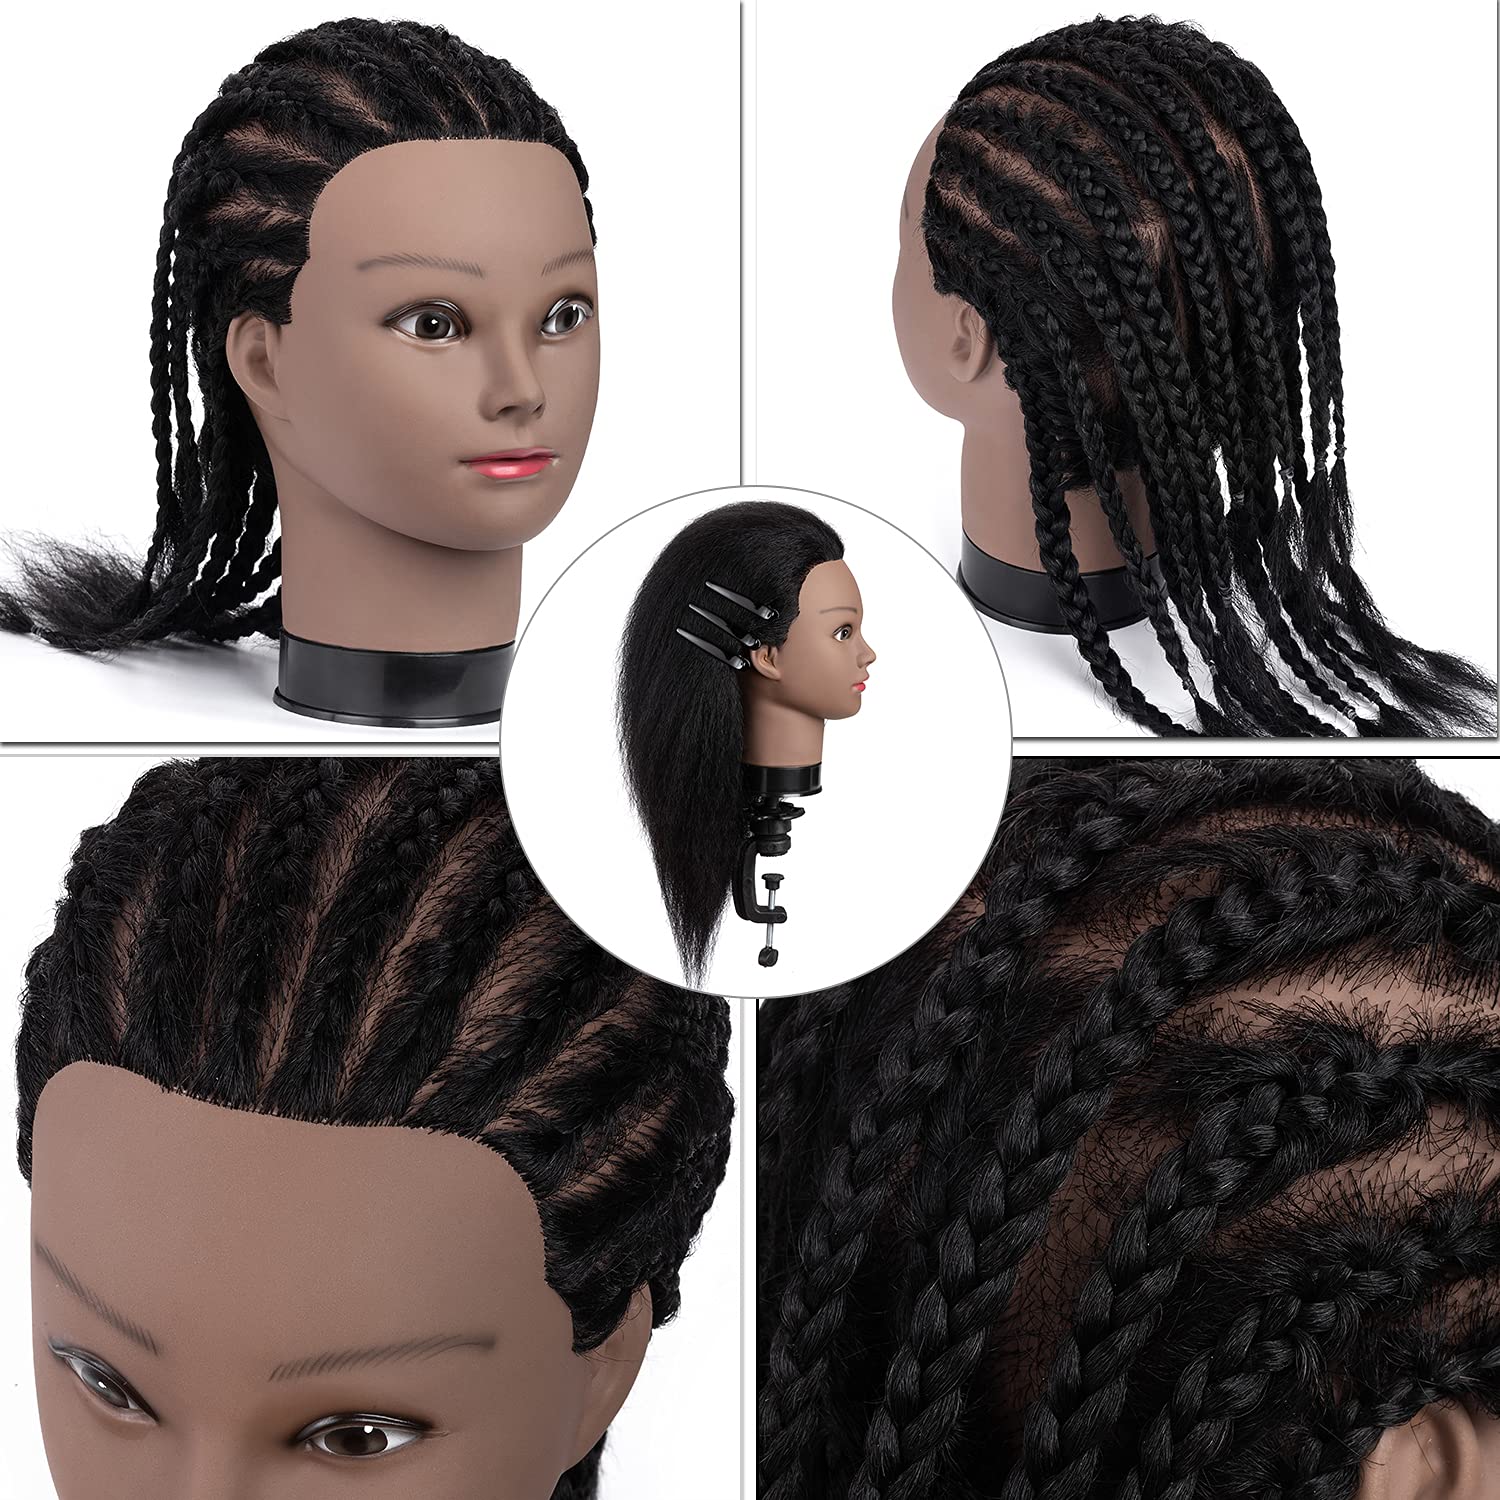 Custom Wig Certification Class and kit